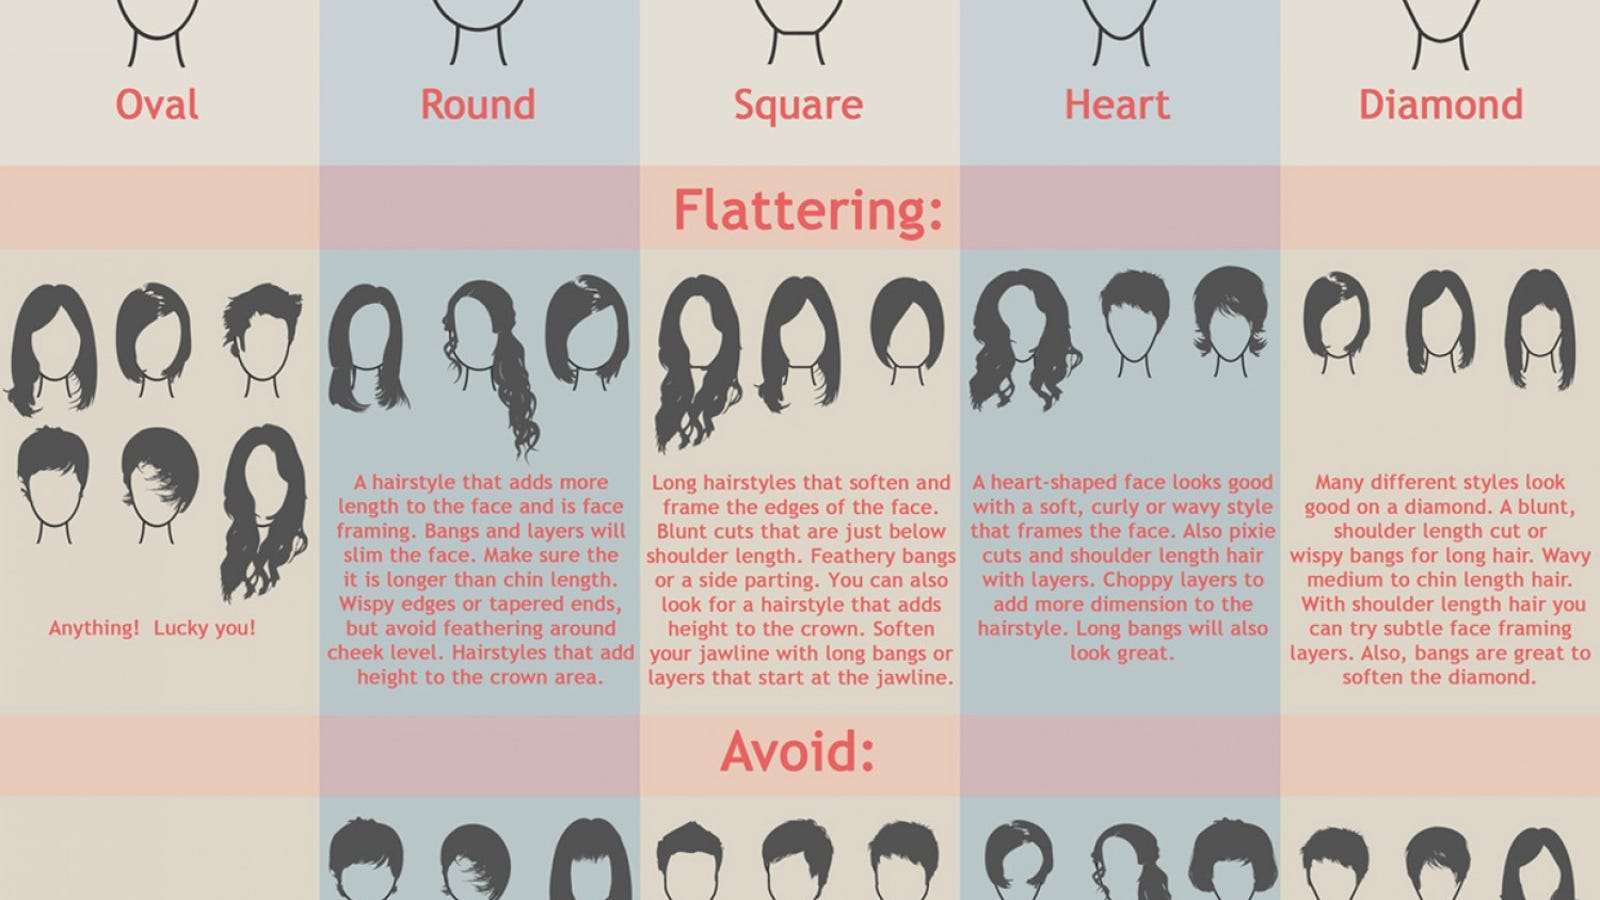 Find the Best Women's Hairstyle for Your Face Shape